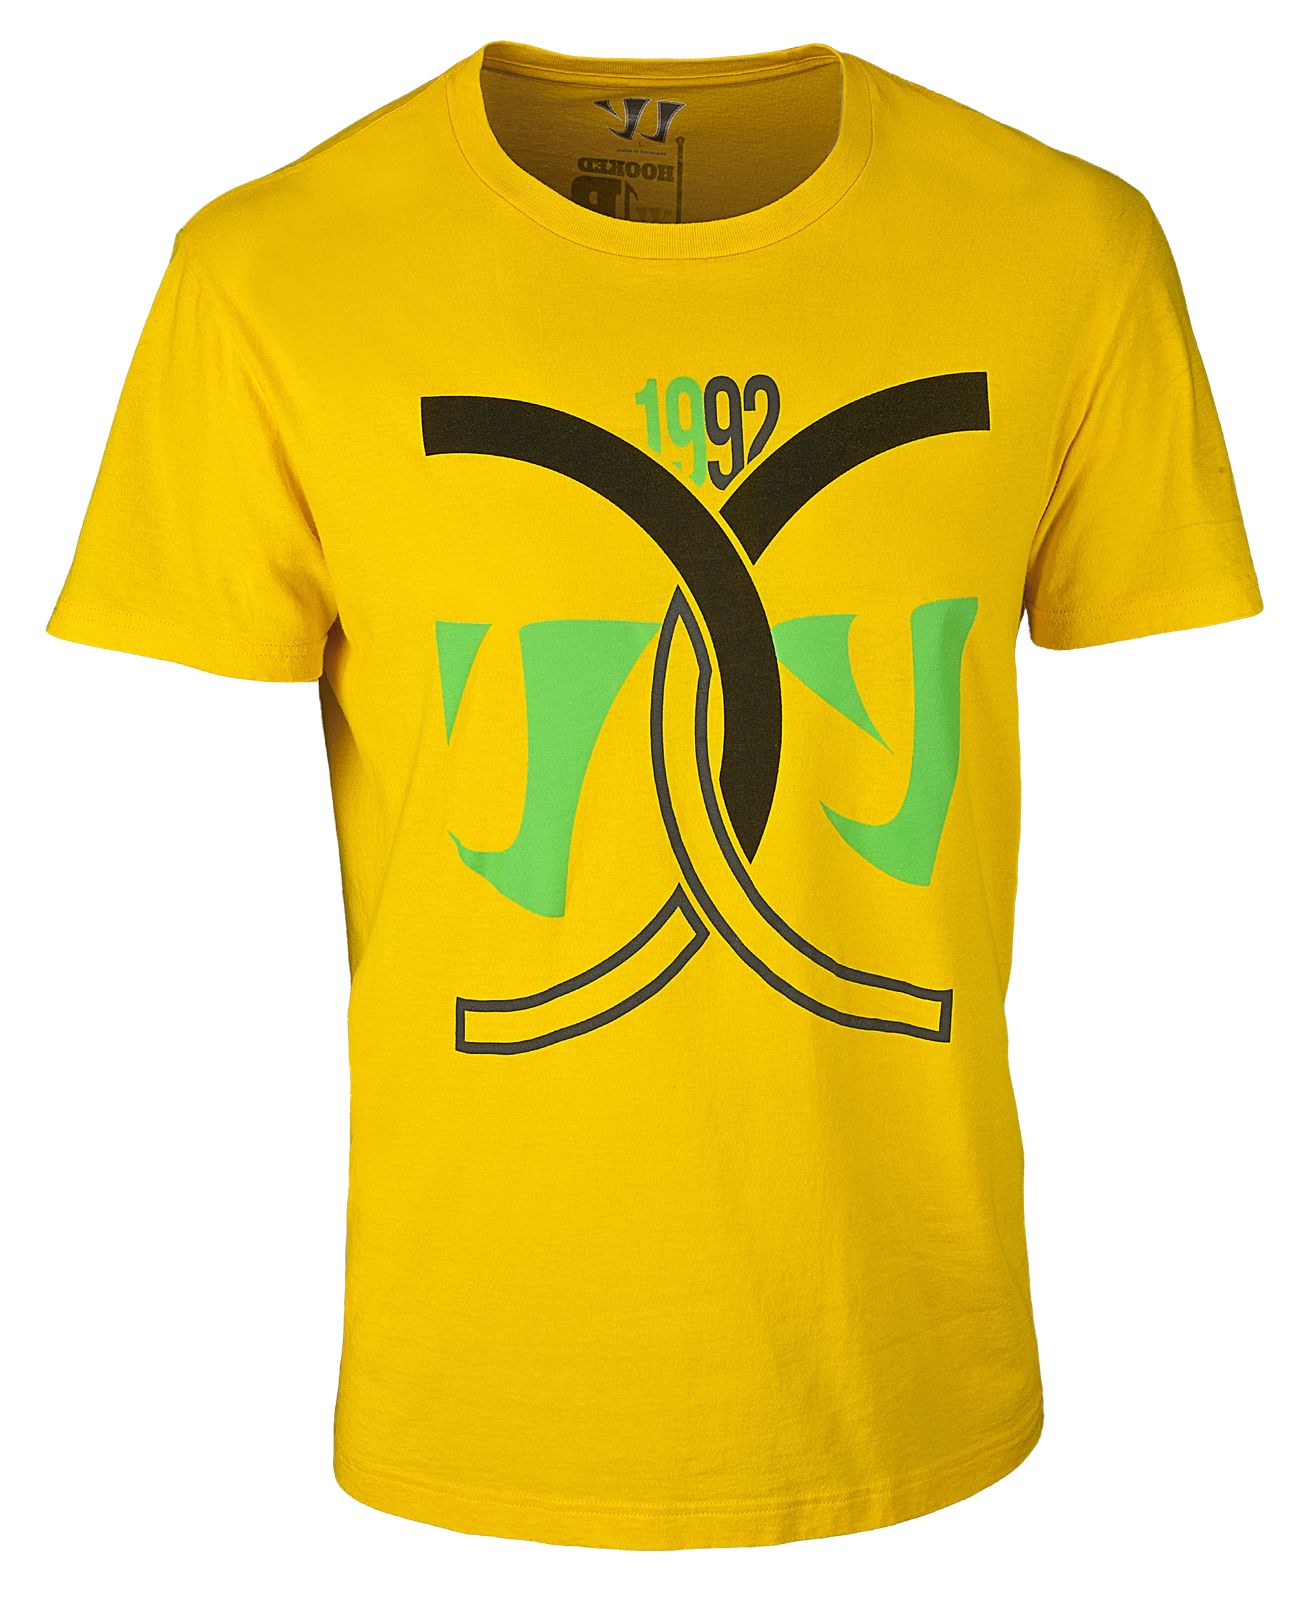 Hook Up Tee, Yellow image number 0